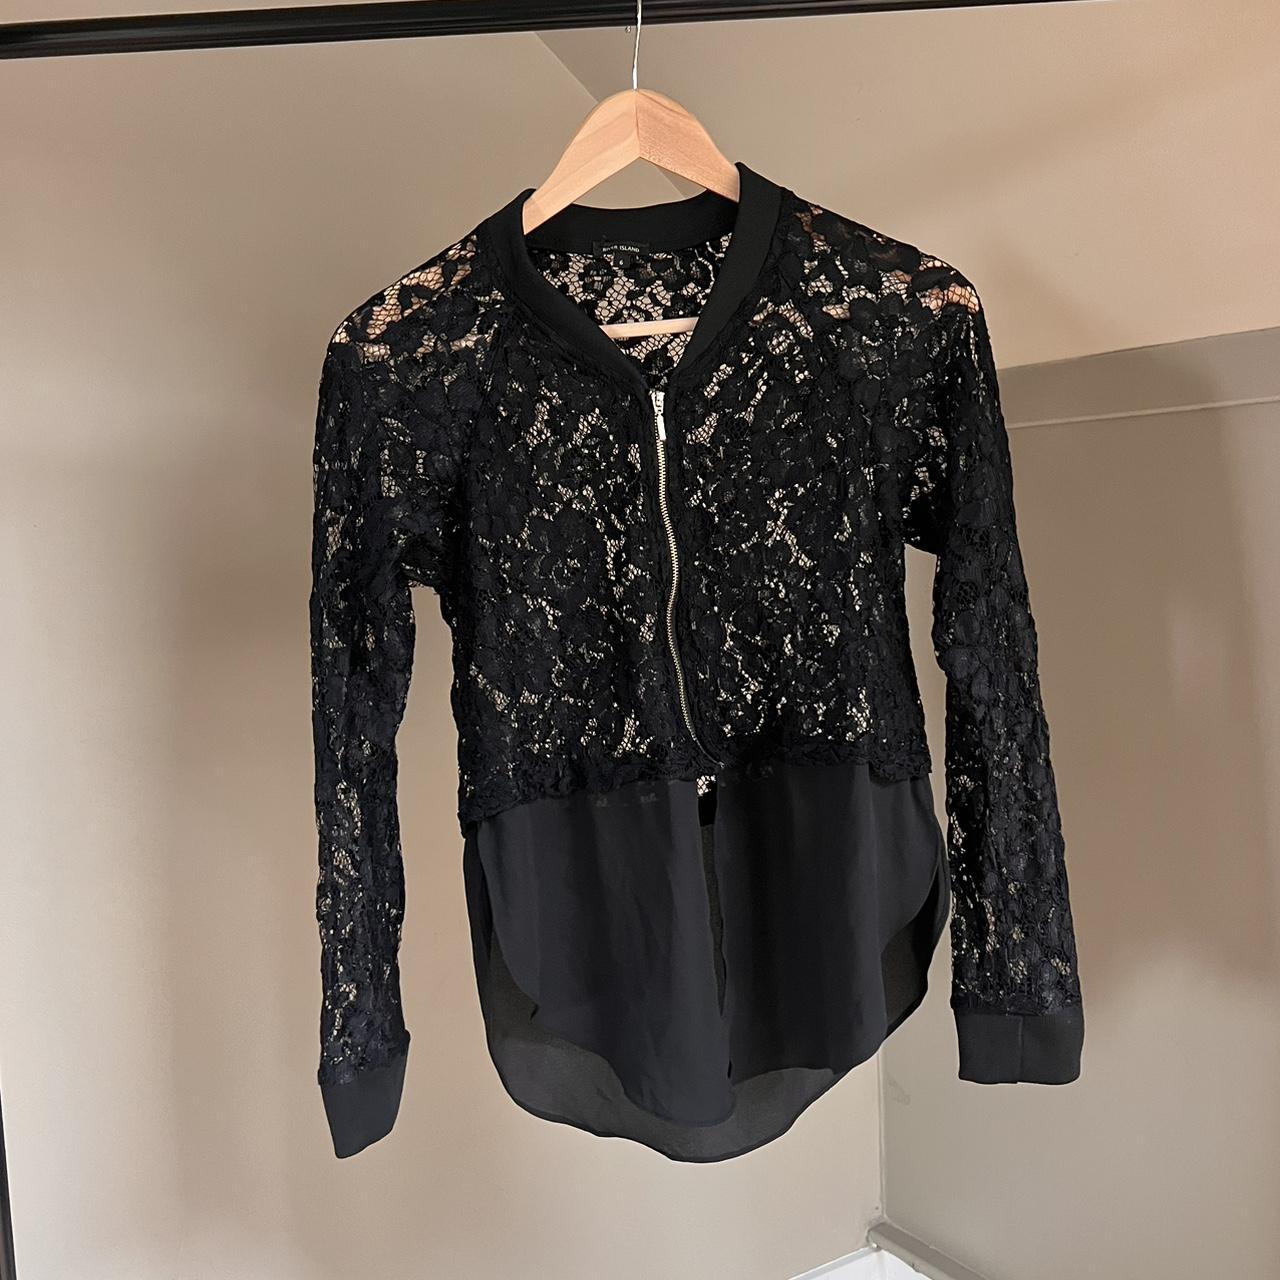 River island black lace blouse with zip. Worn once - Depop